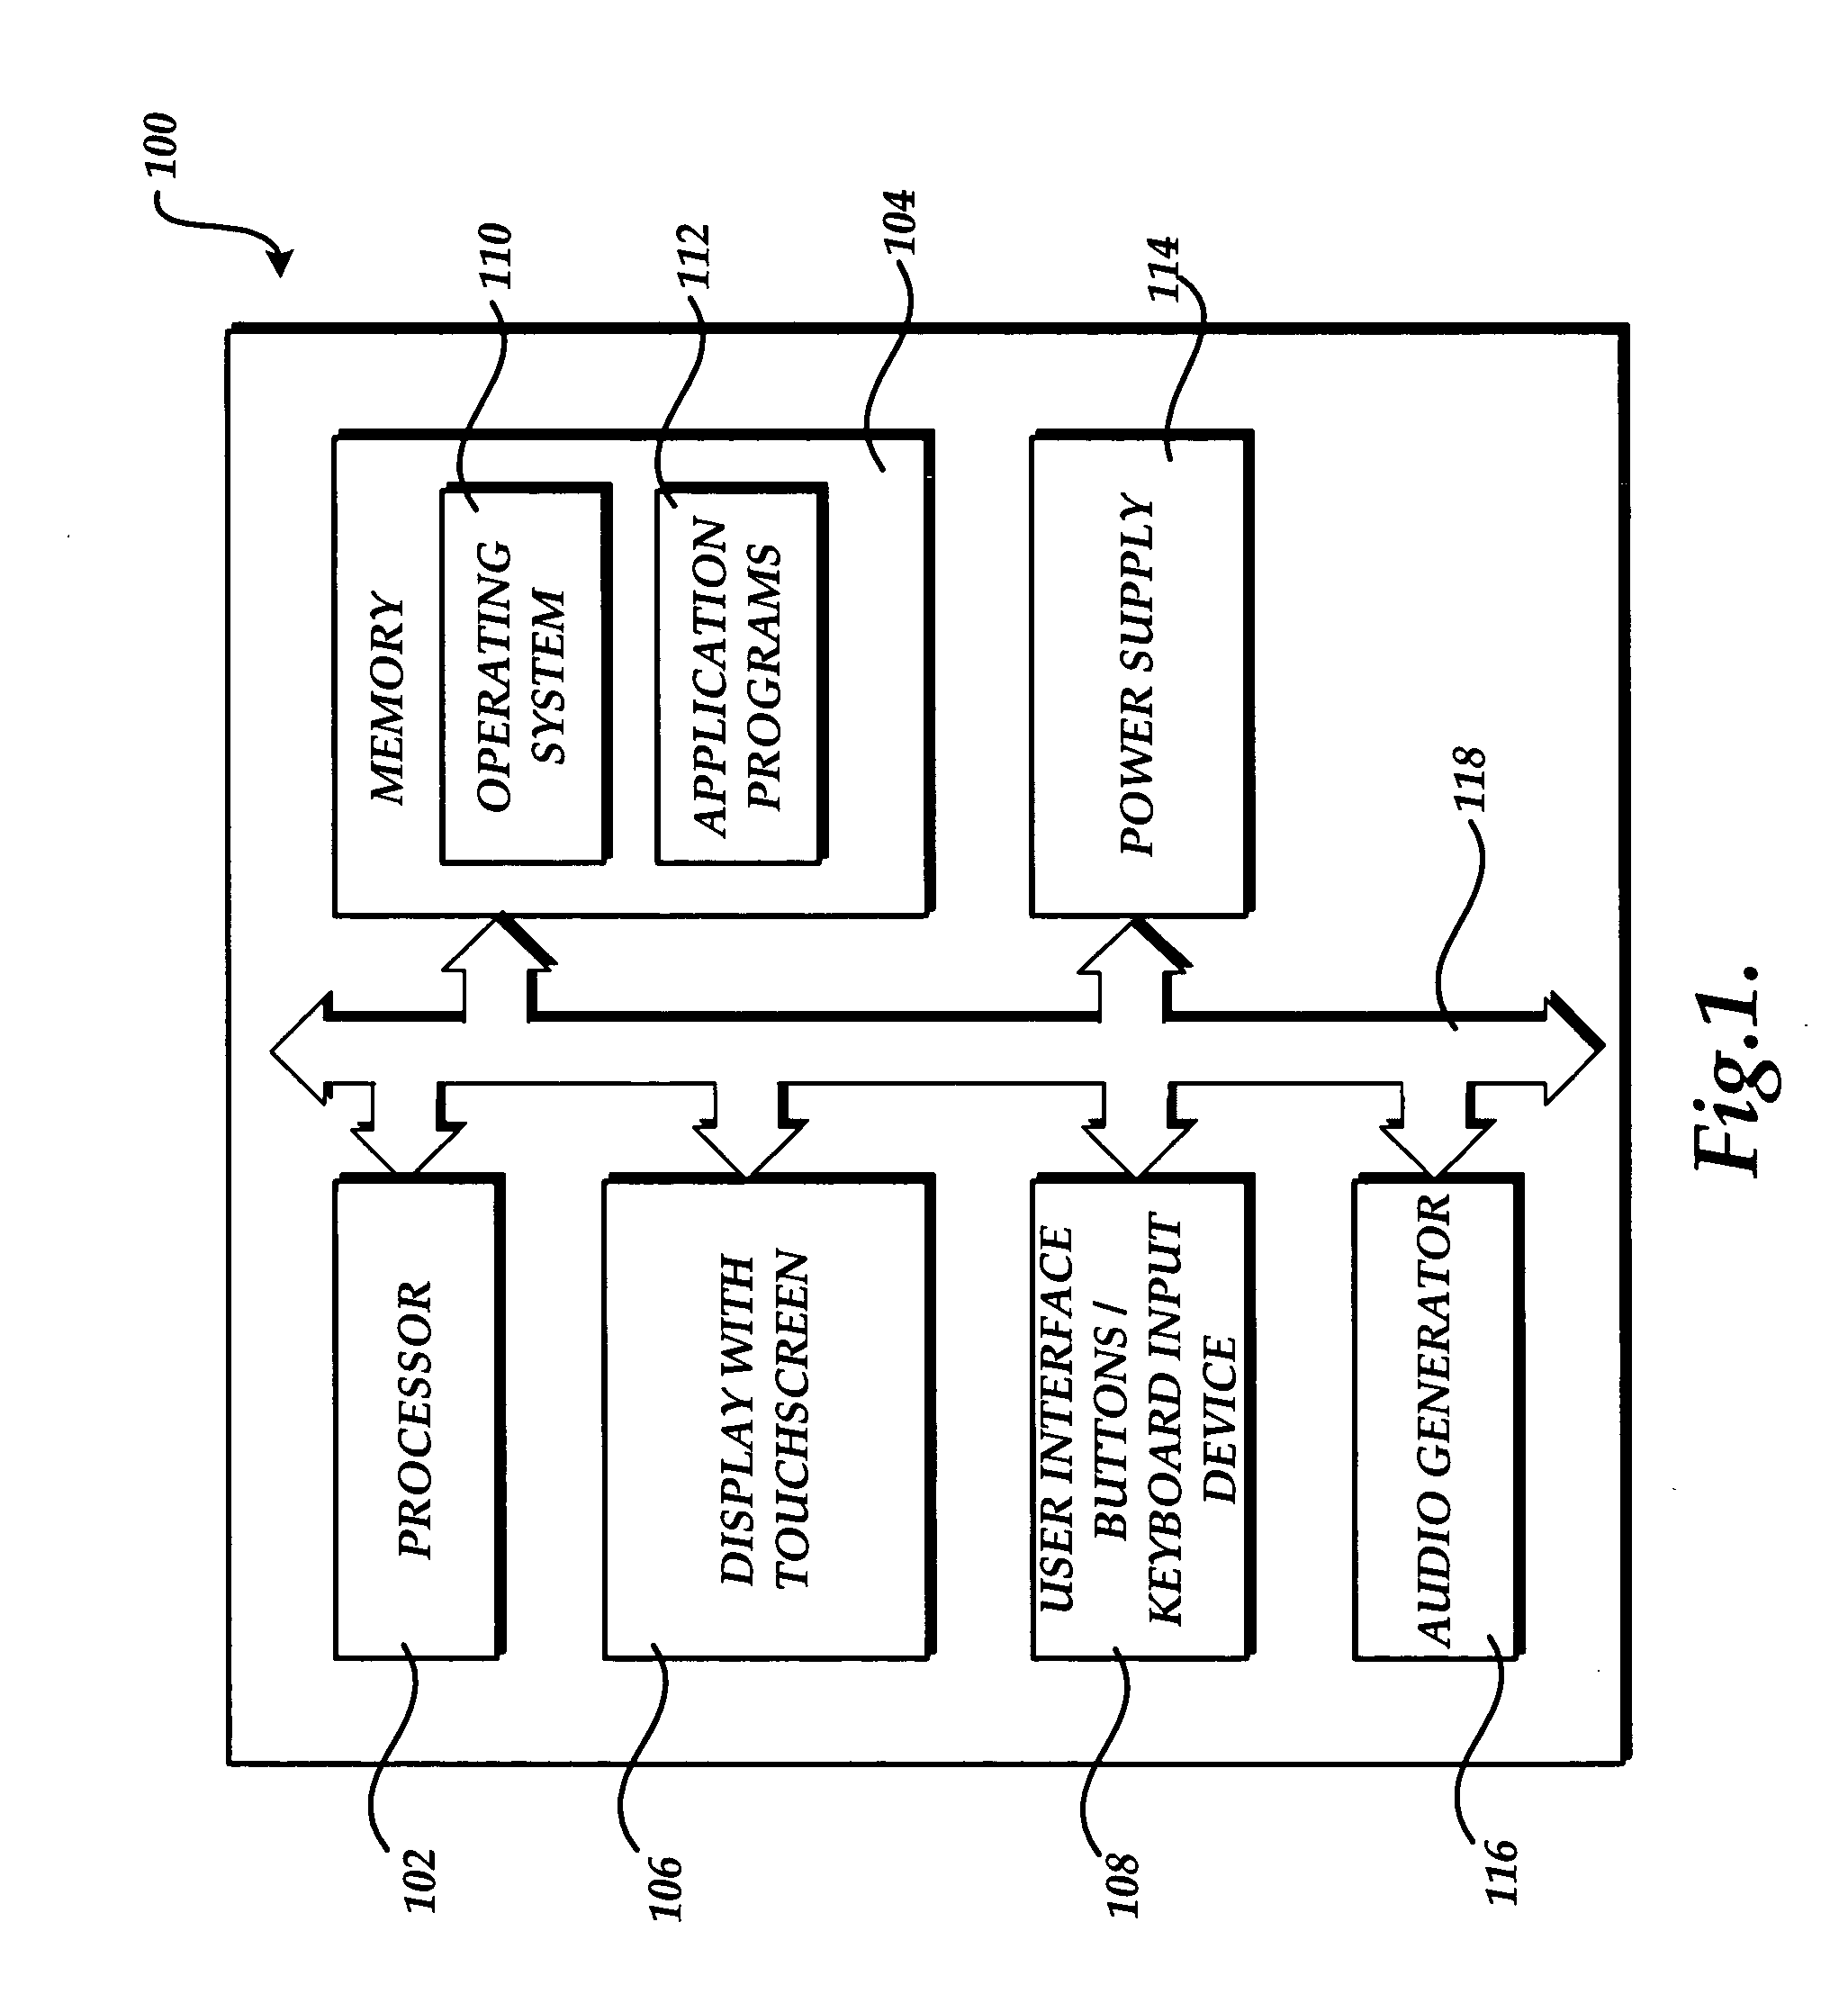 Method and apparatus for enabling application program compatibility with display devices having improved pixel density